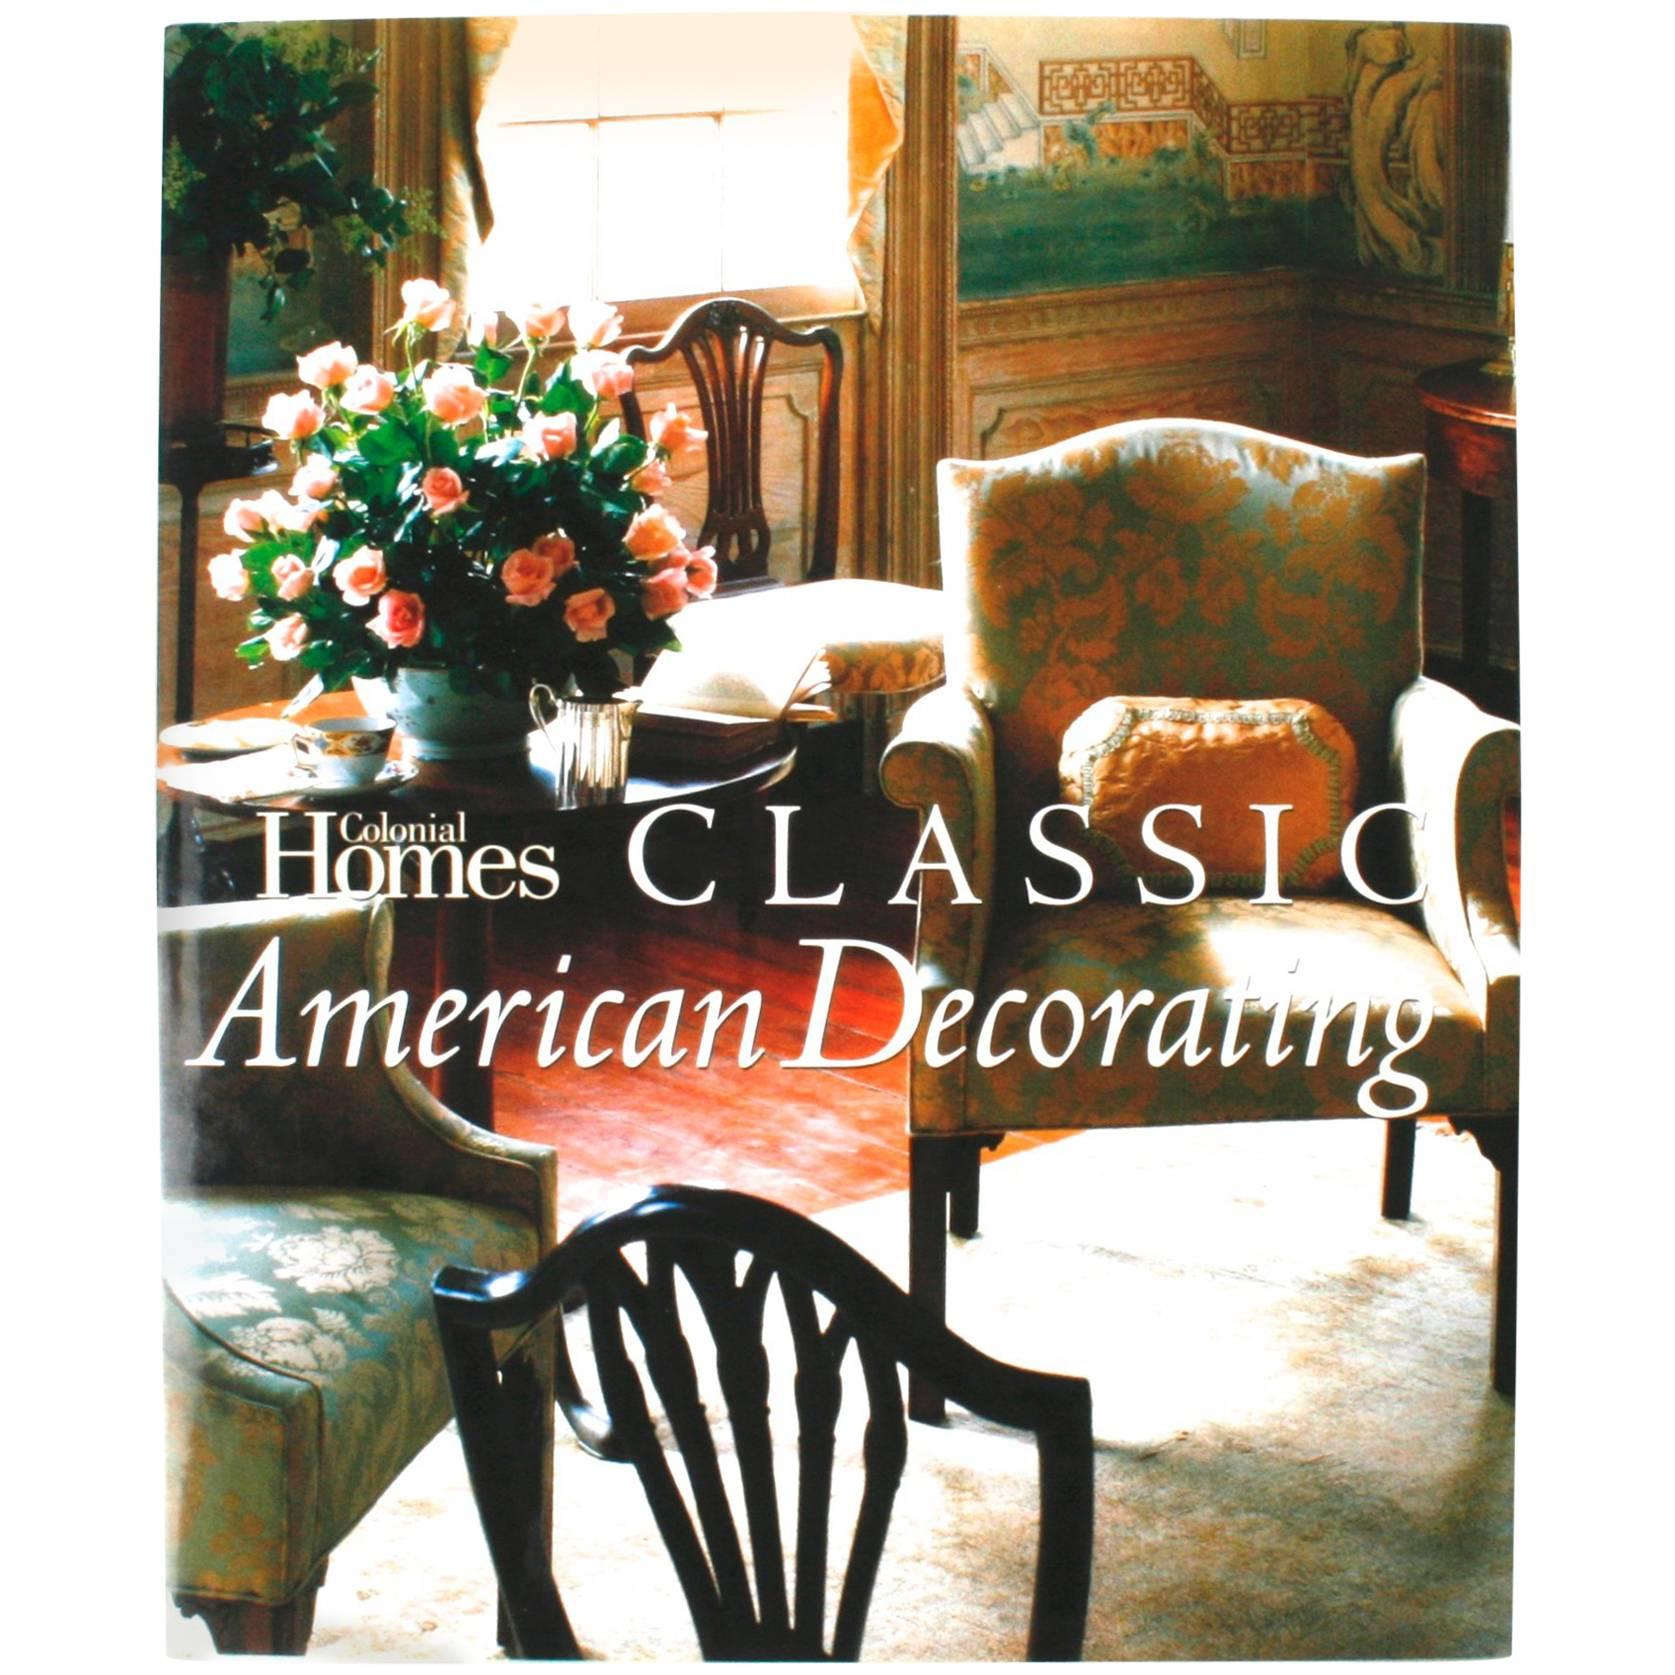 Classic American Decorating by Colonial Homes, First Edition